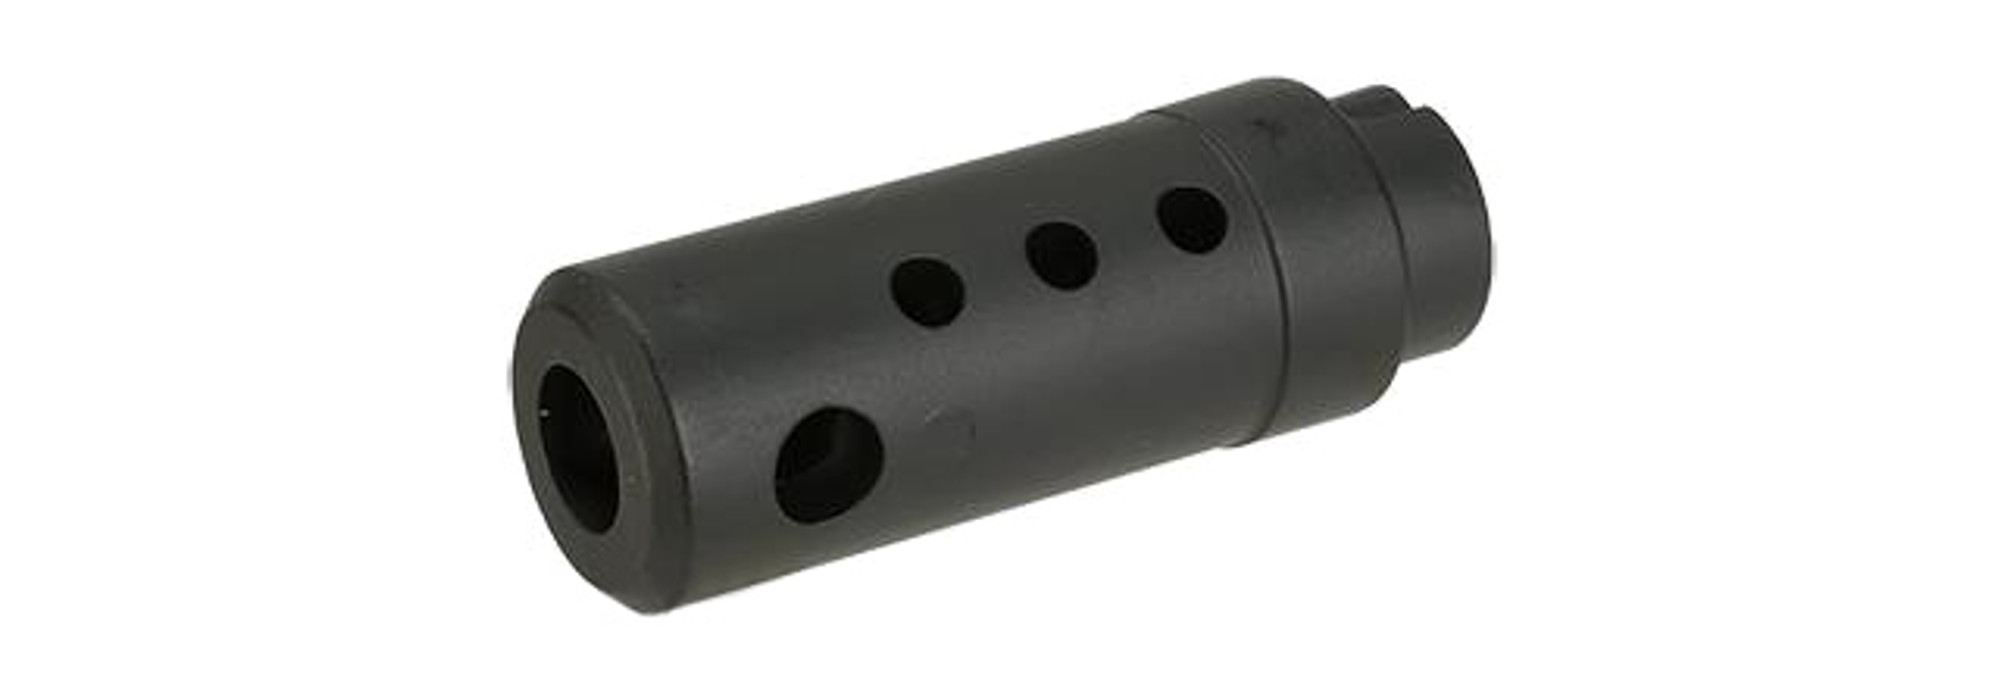 ARES Metal Flash Hider for VZ. 58 Airsoft AEG Rifles - 14mm Positive